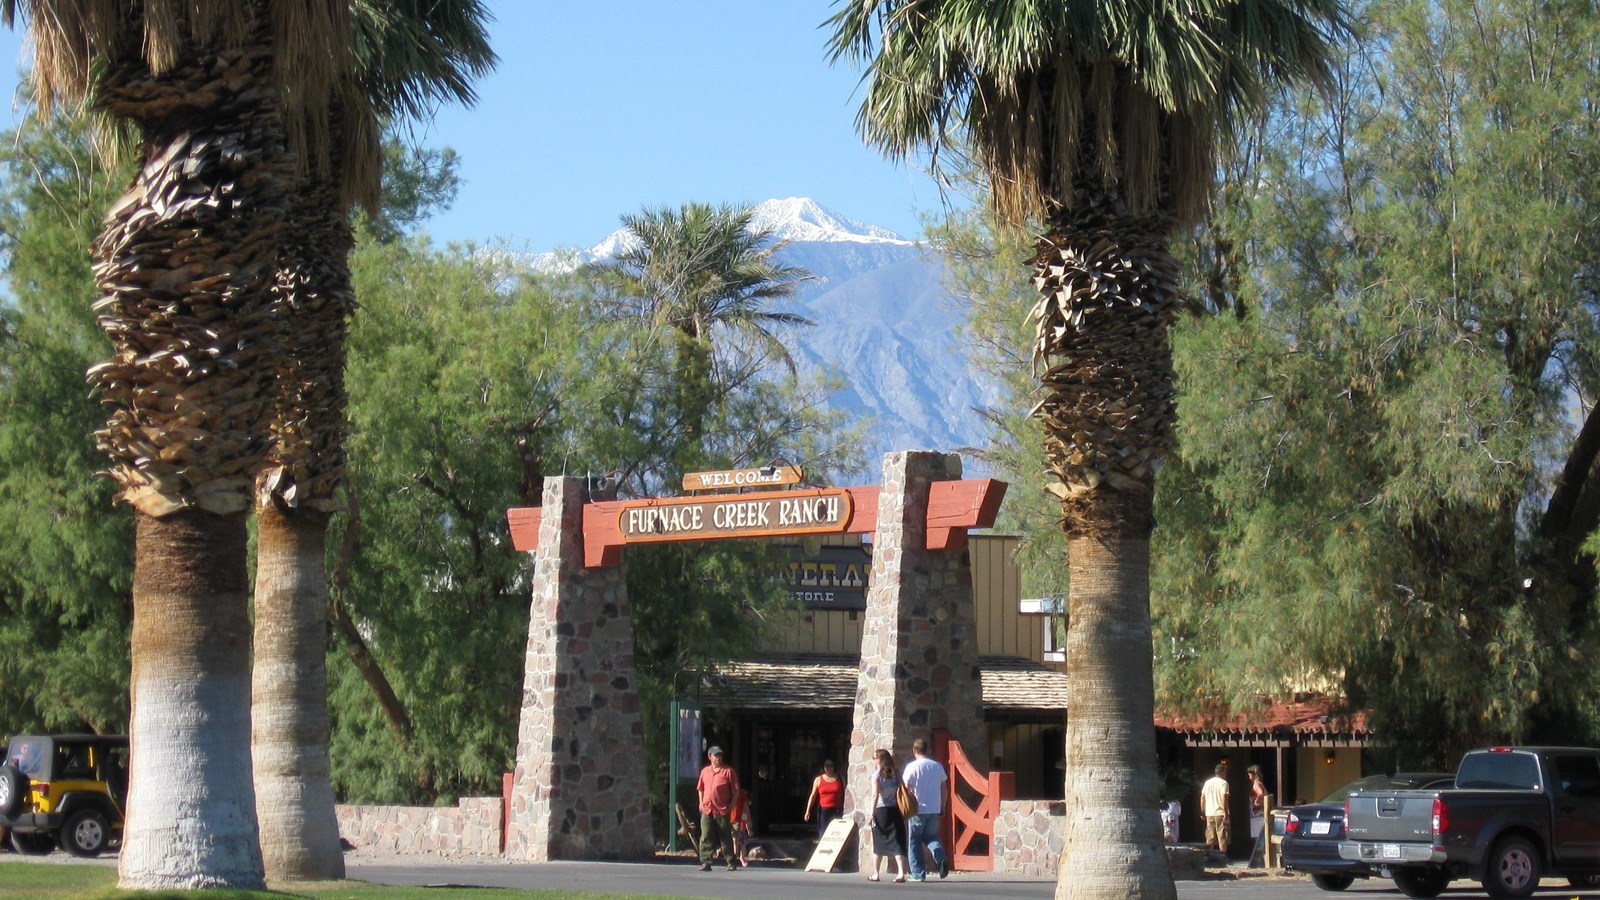 a wooden arch framed by palm trees with mountains in the distance